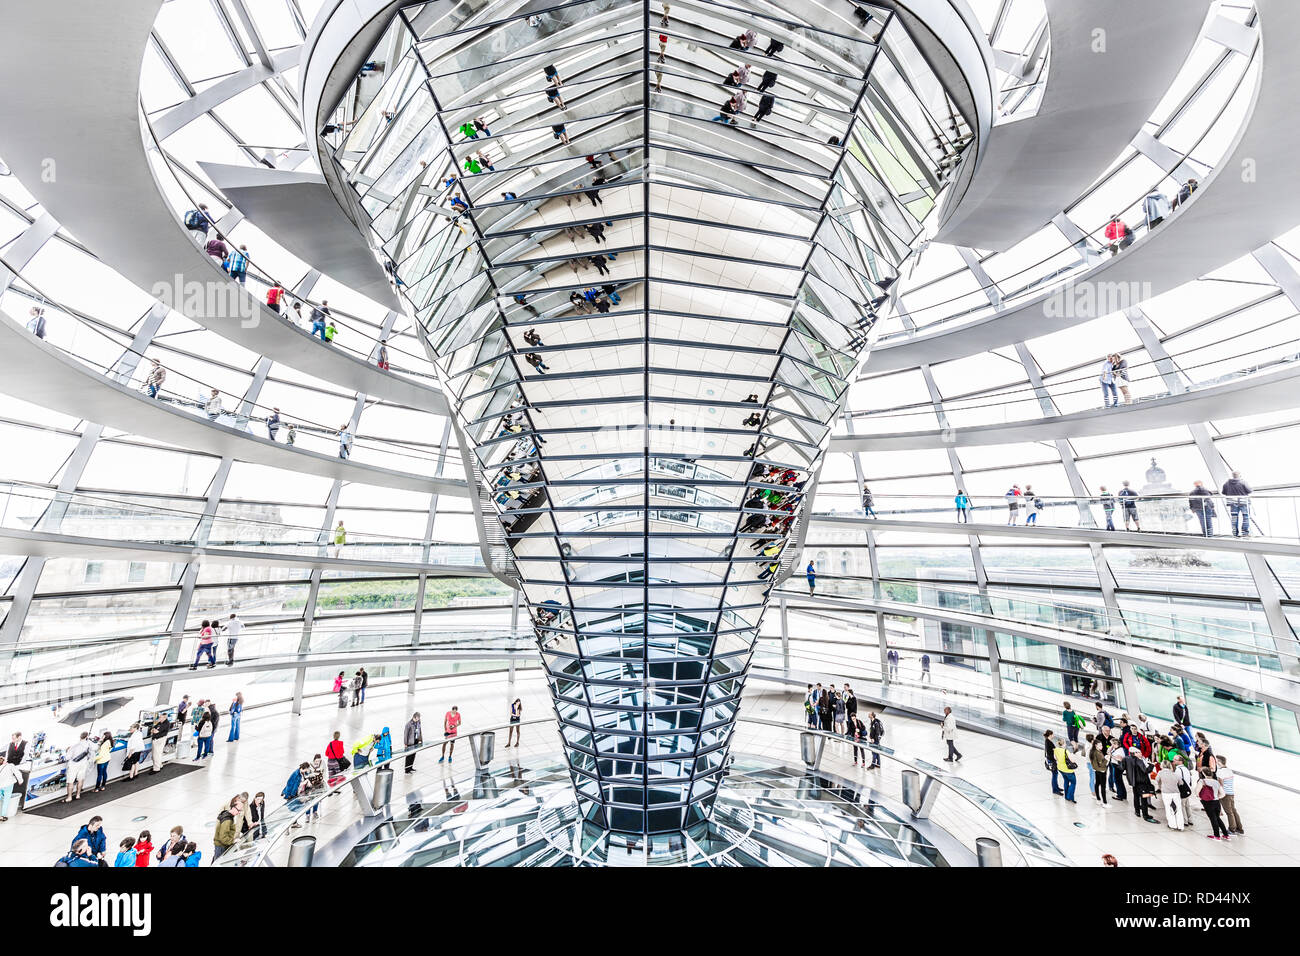 BERLIN - JULY 19, 2015: Interior view of famous Reichstag Dome in Berlin, Germany. Constructed to symbolize the reunification of Germany it's now one  Stock Photo